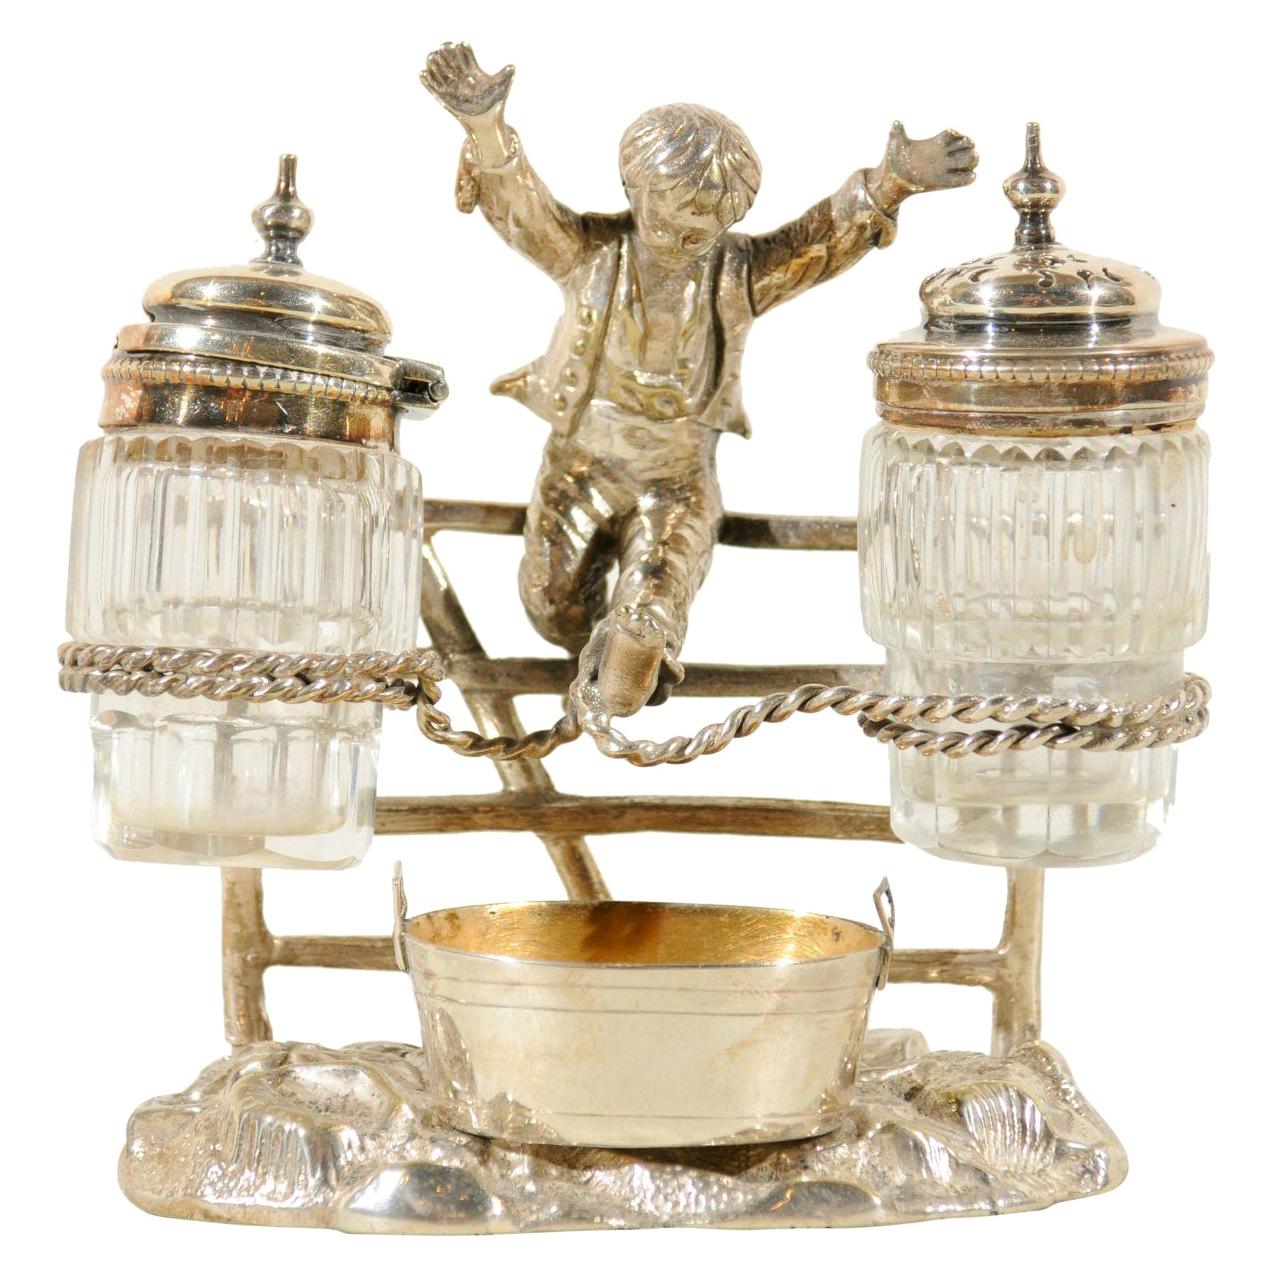 English Silver Plated Cruet Set of Young Boy Leaping in the Air, circa 1873